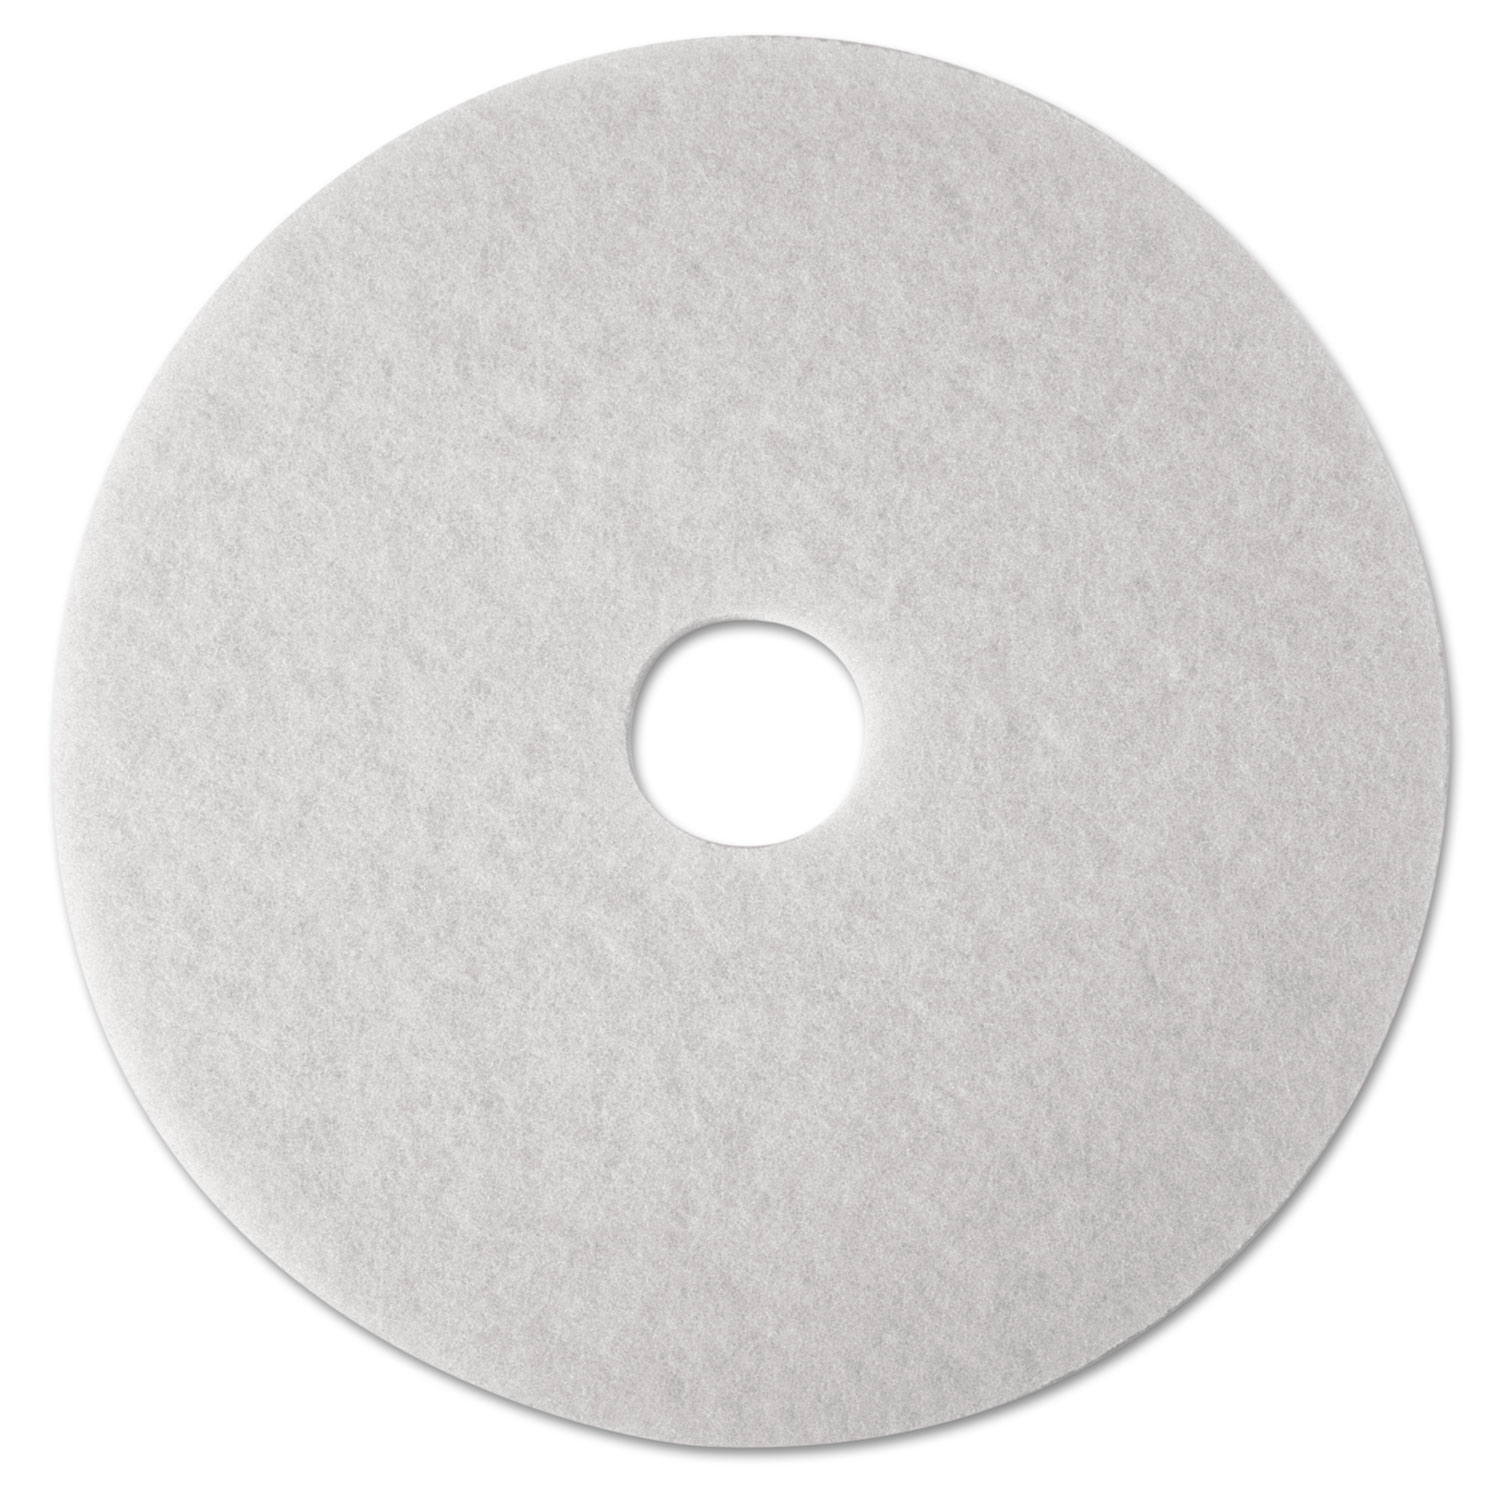 5 Pack 3M 4100 Buffing/Cleaning Pad White Free Shipping! 17 In 